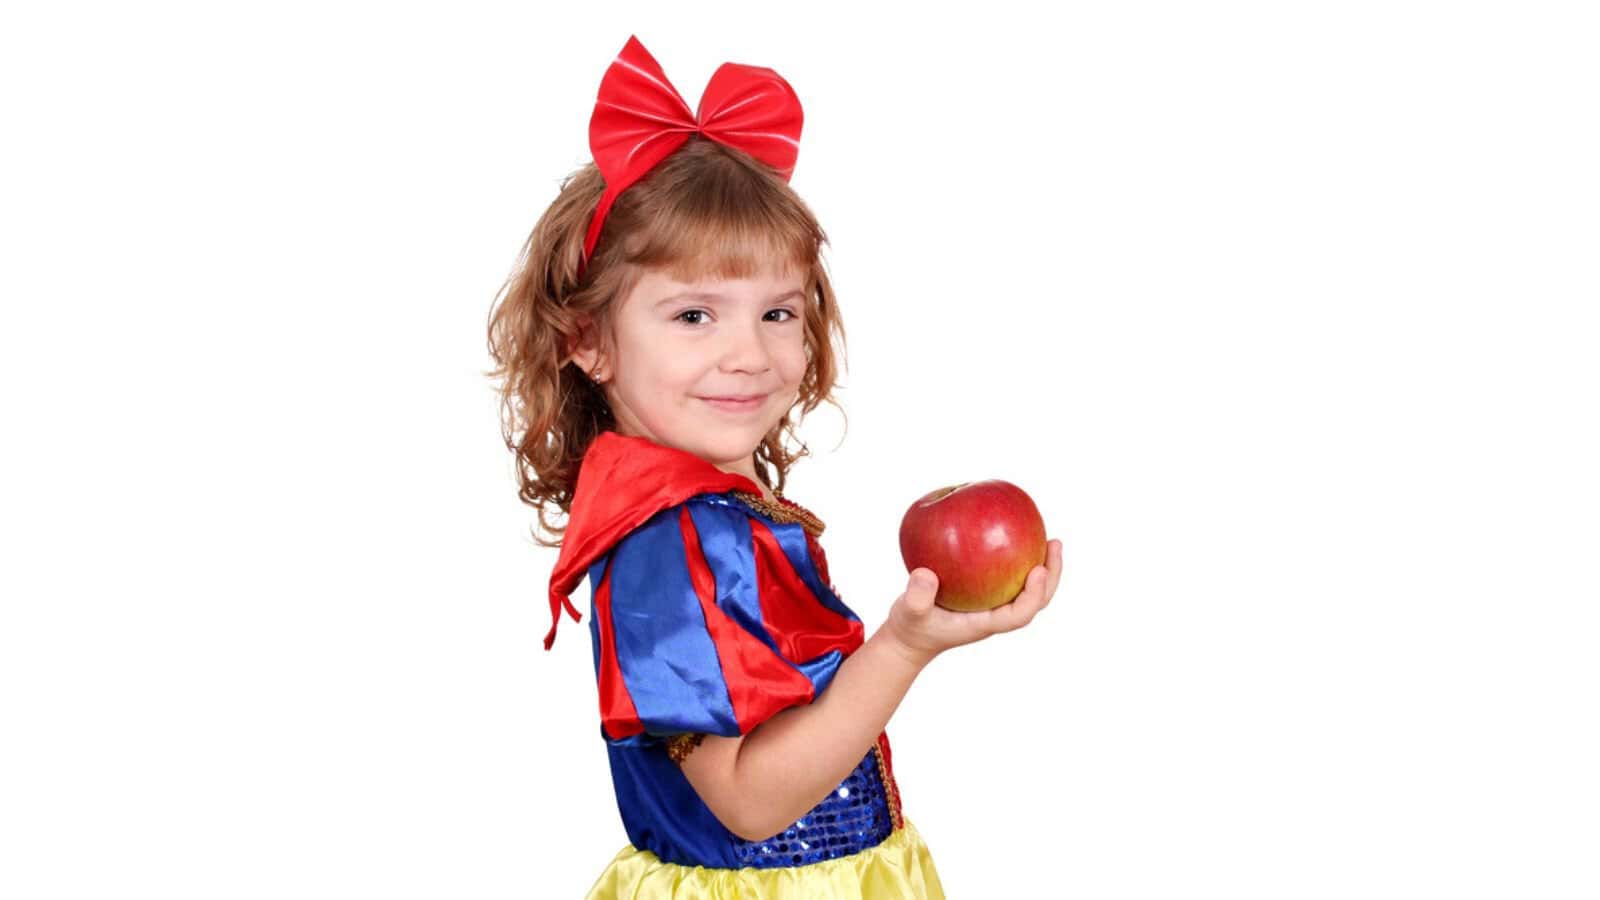 Little girl snow white with apple